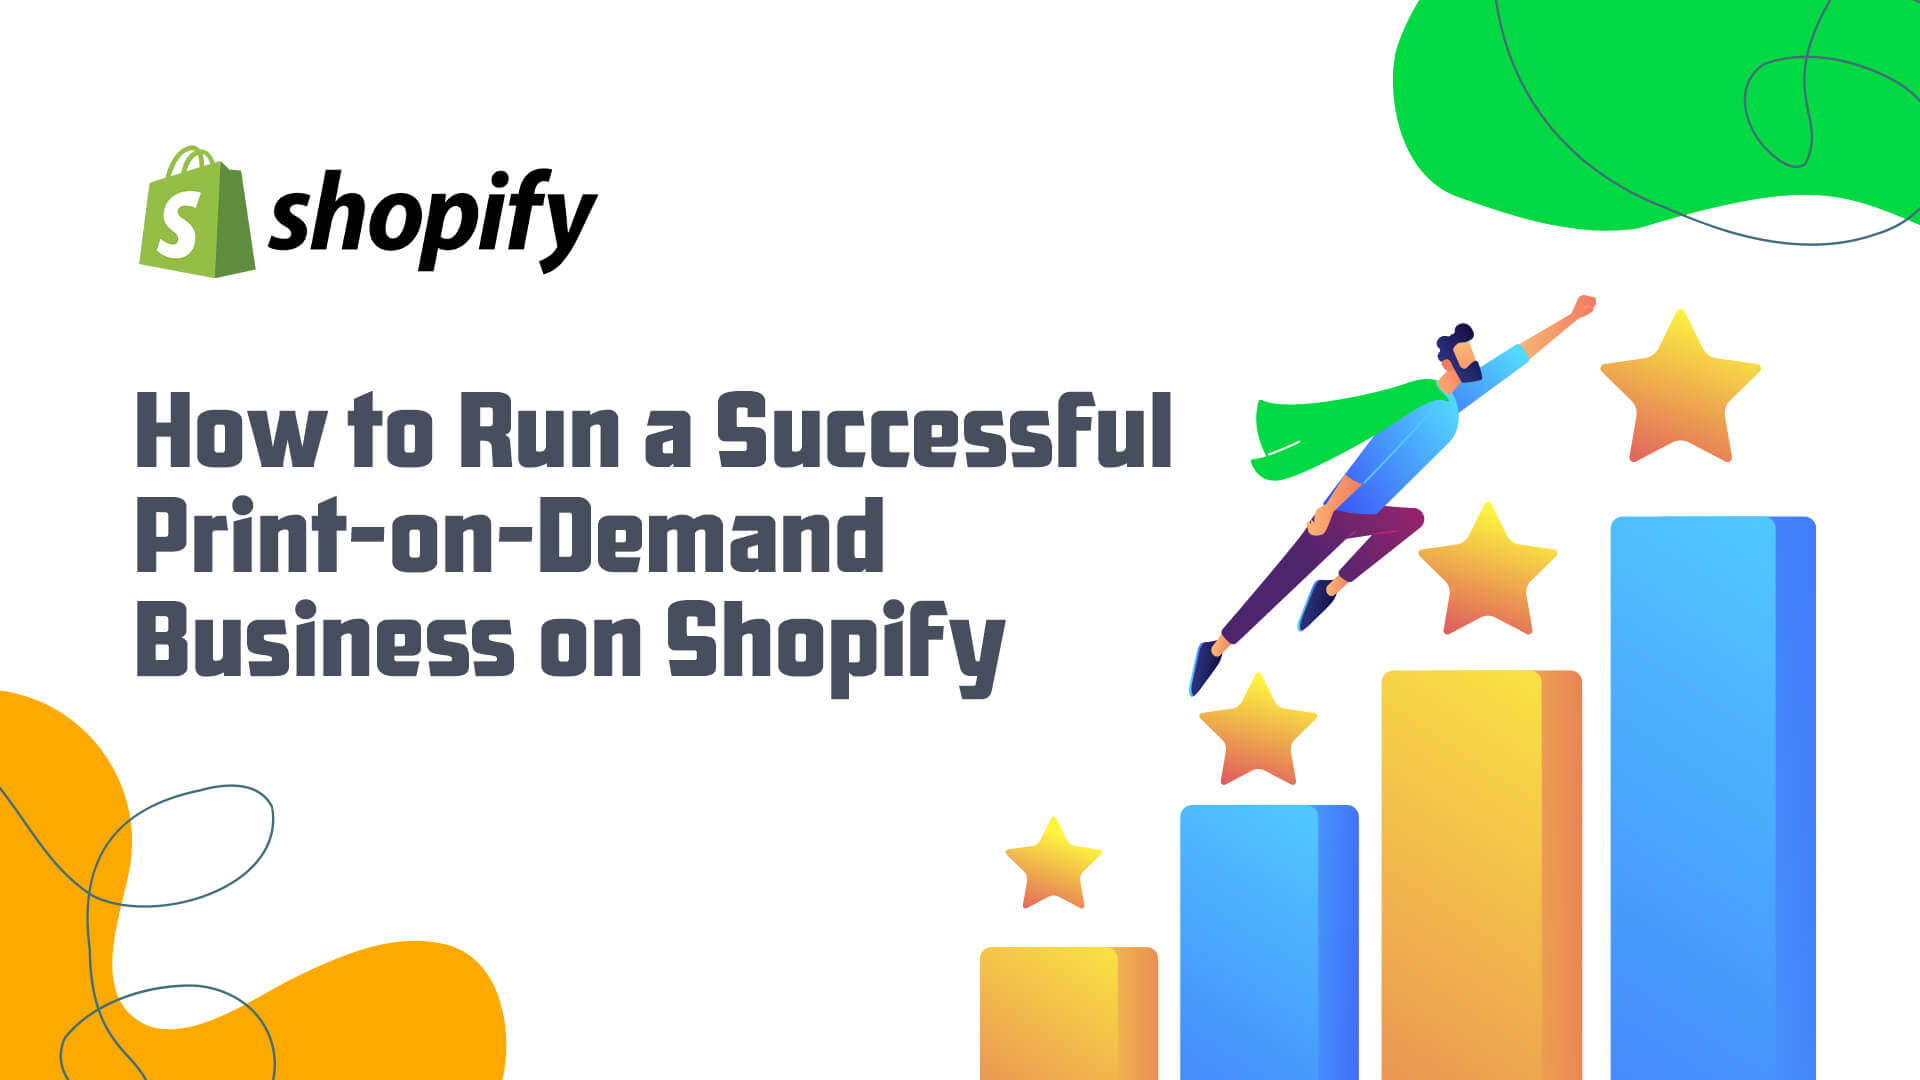 How to start a successful print on demand business on Shopify